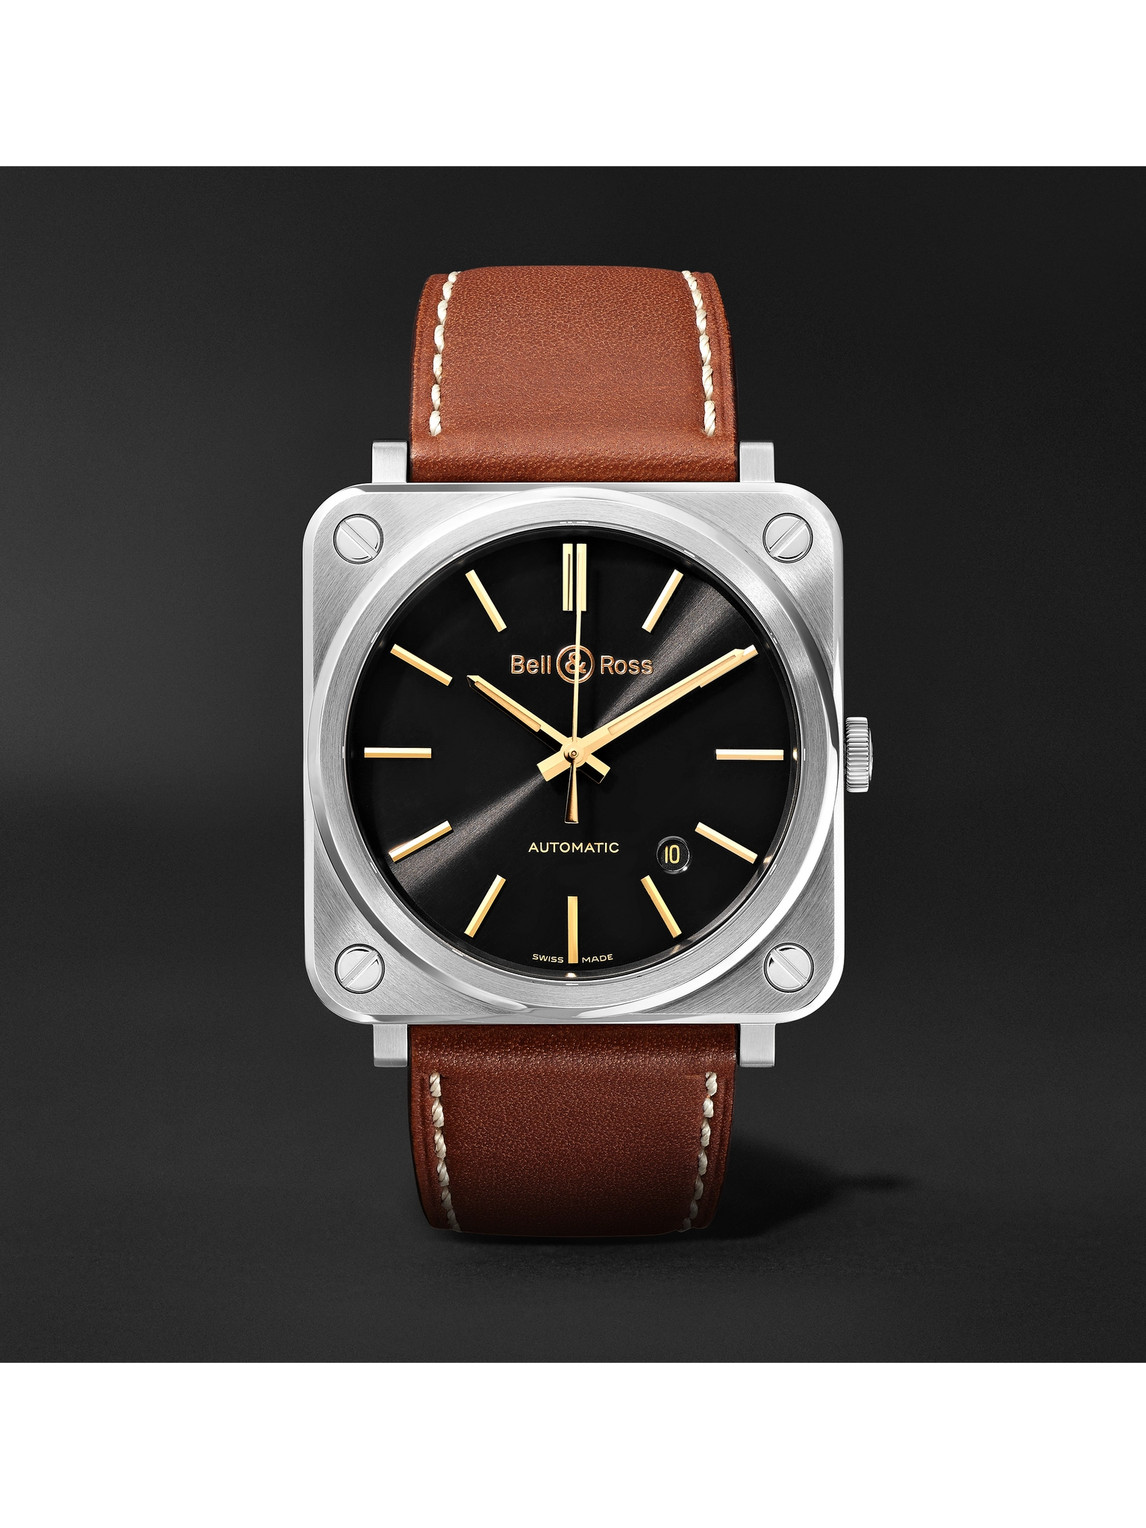 Bell & Ross Br S-92 Golden Heritage Automatic 39mm Stainless Steel And Leather Watch, Ref. No. Brs92-st-g-he/sca In Brown